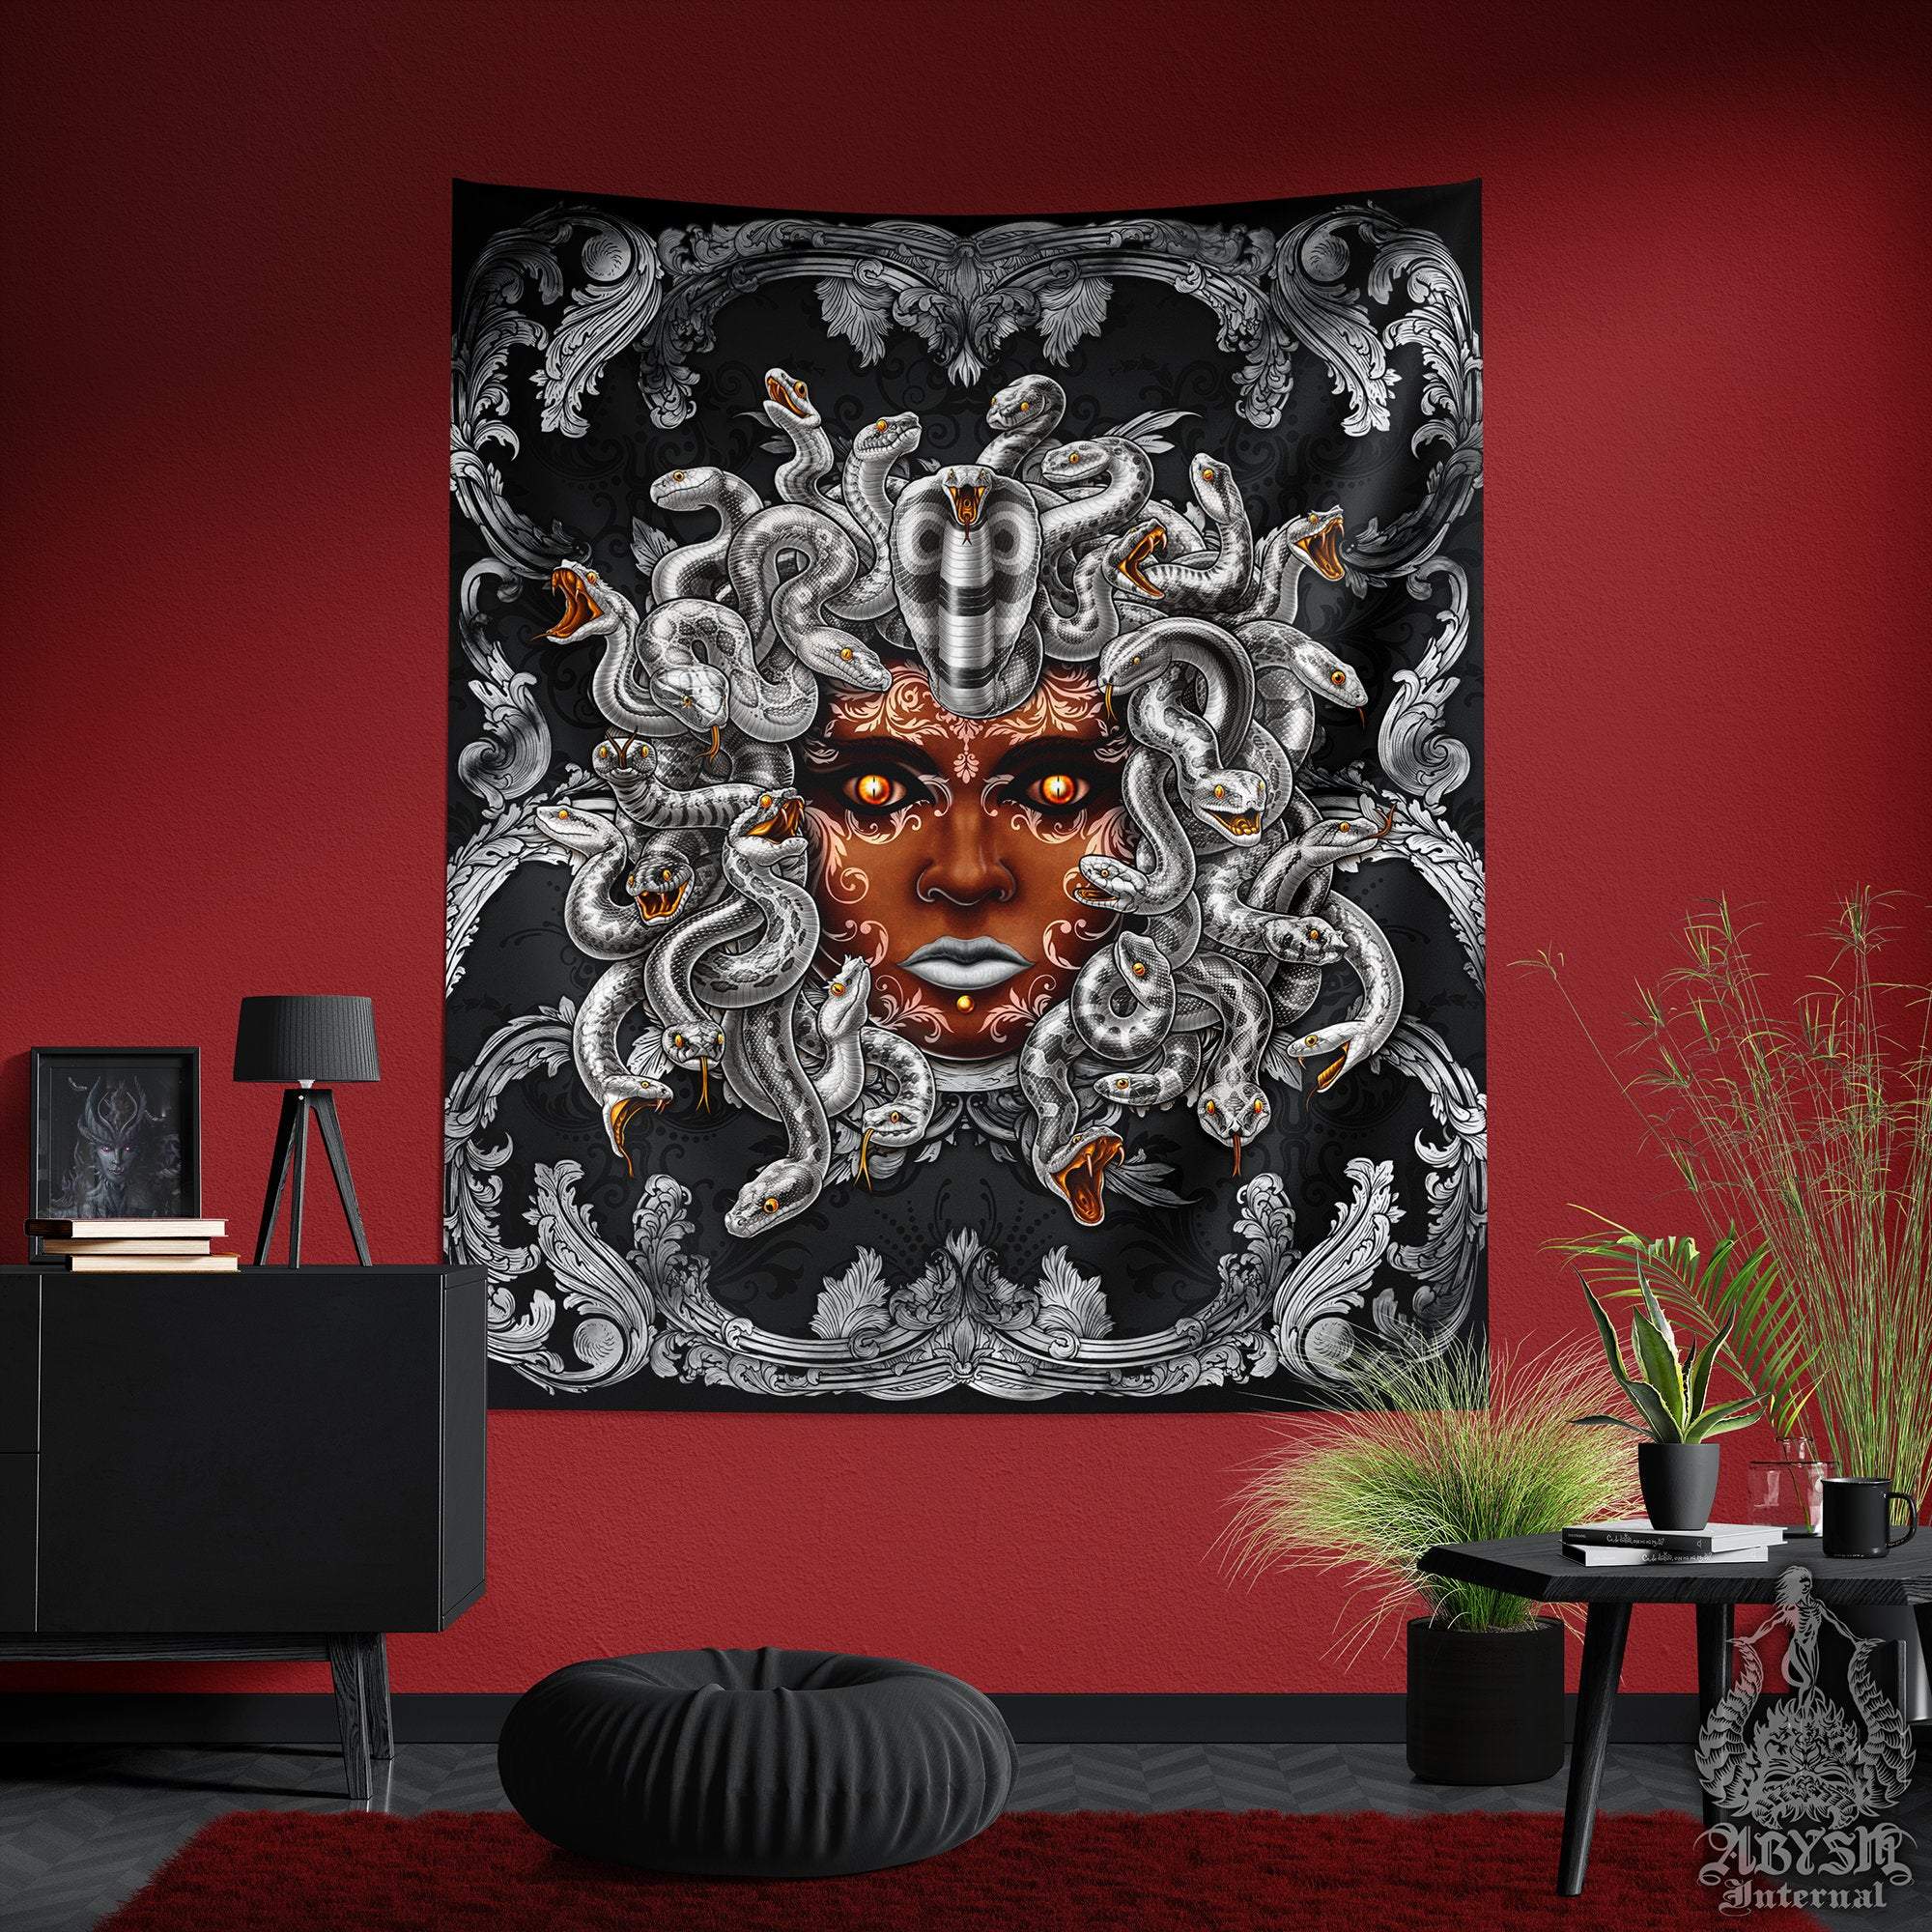 Medusa Tapestry, Baroque Wall Hanging, Goth Home Decor, Art Print - Silver Snakes - Abysm Internal